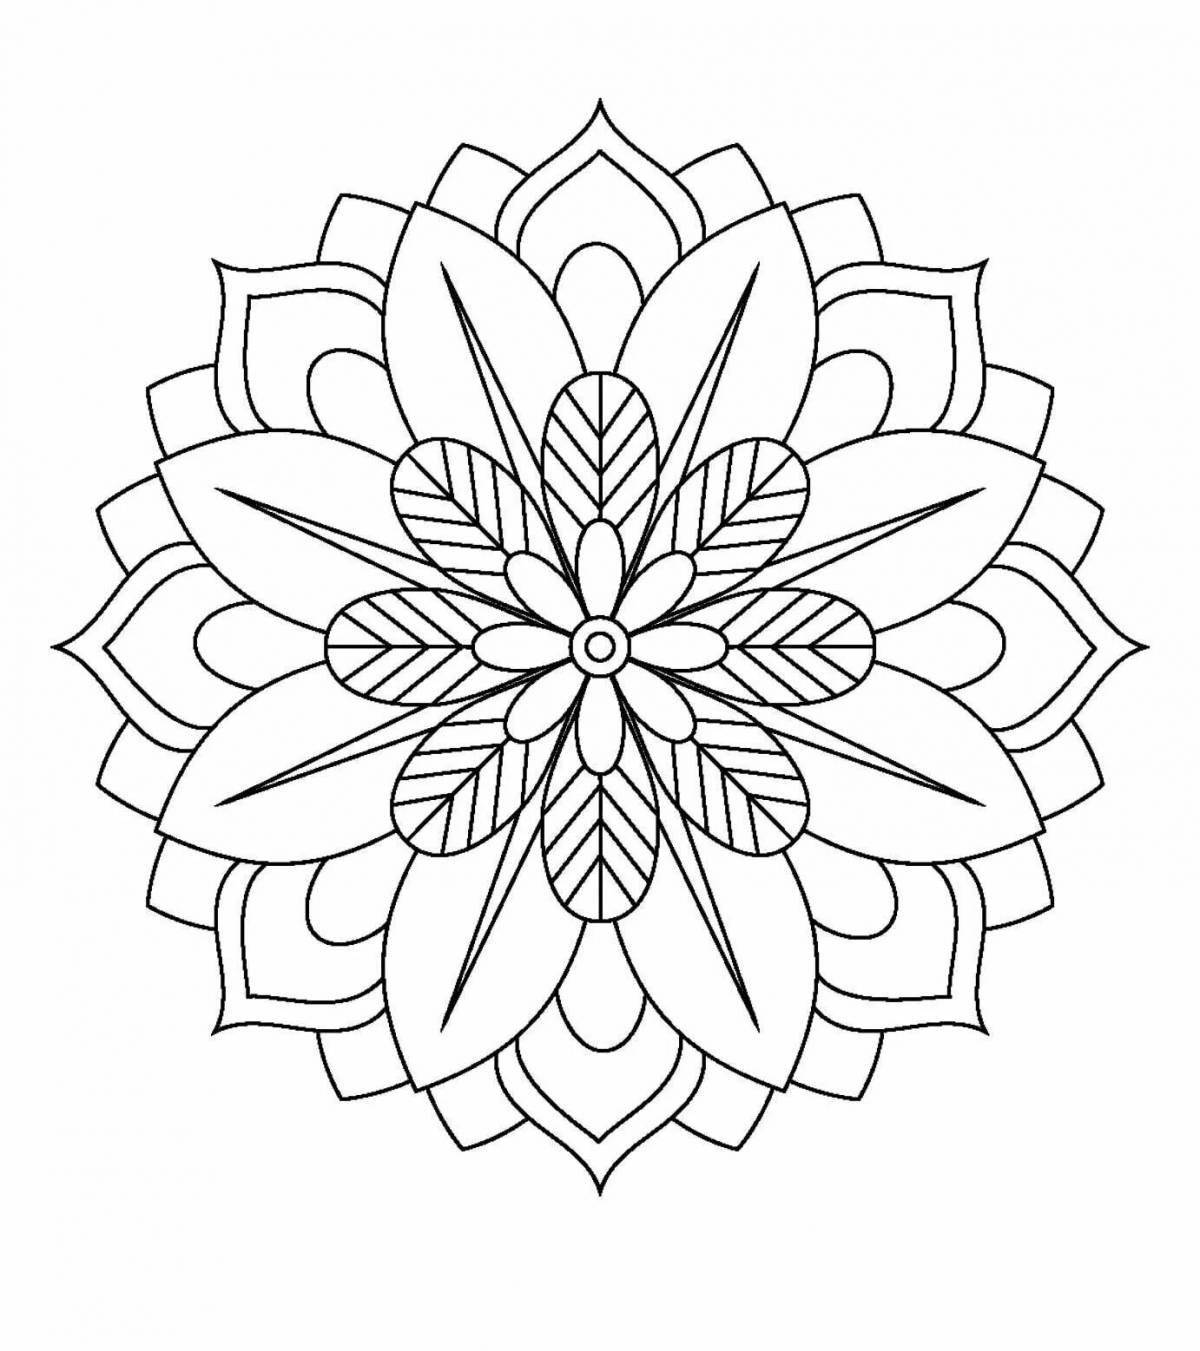 Glowing pattern coloring page